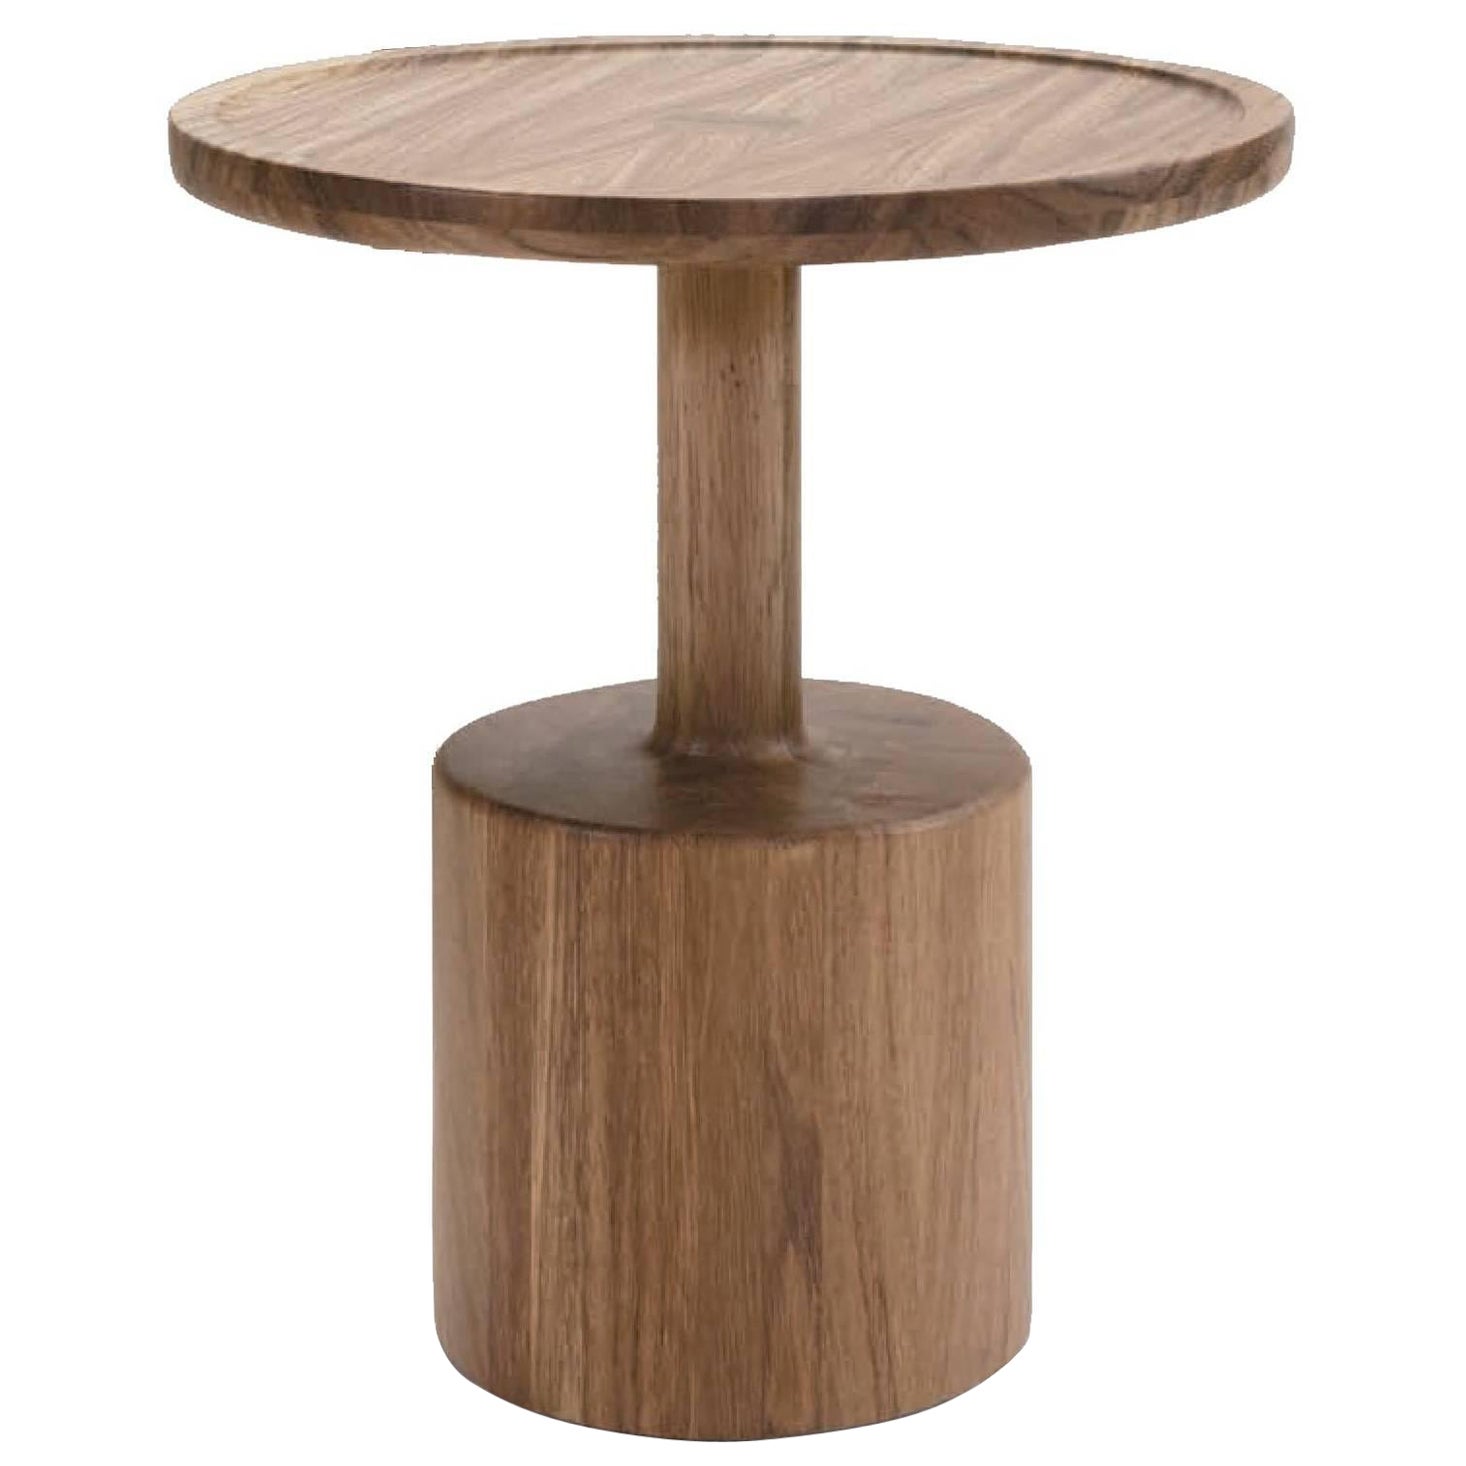 Contemporary Boton One Side Table in Conacaste Solid Wood by Labrica